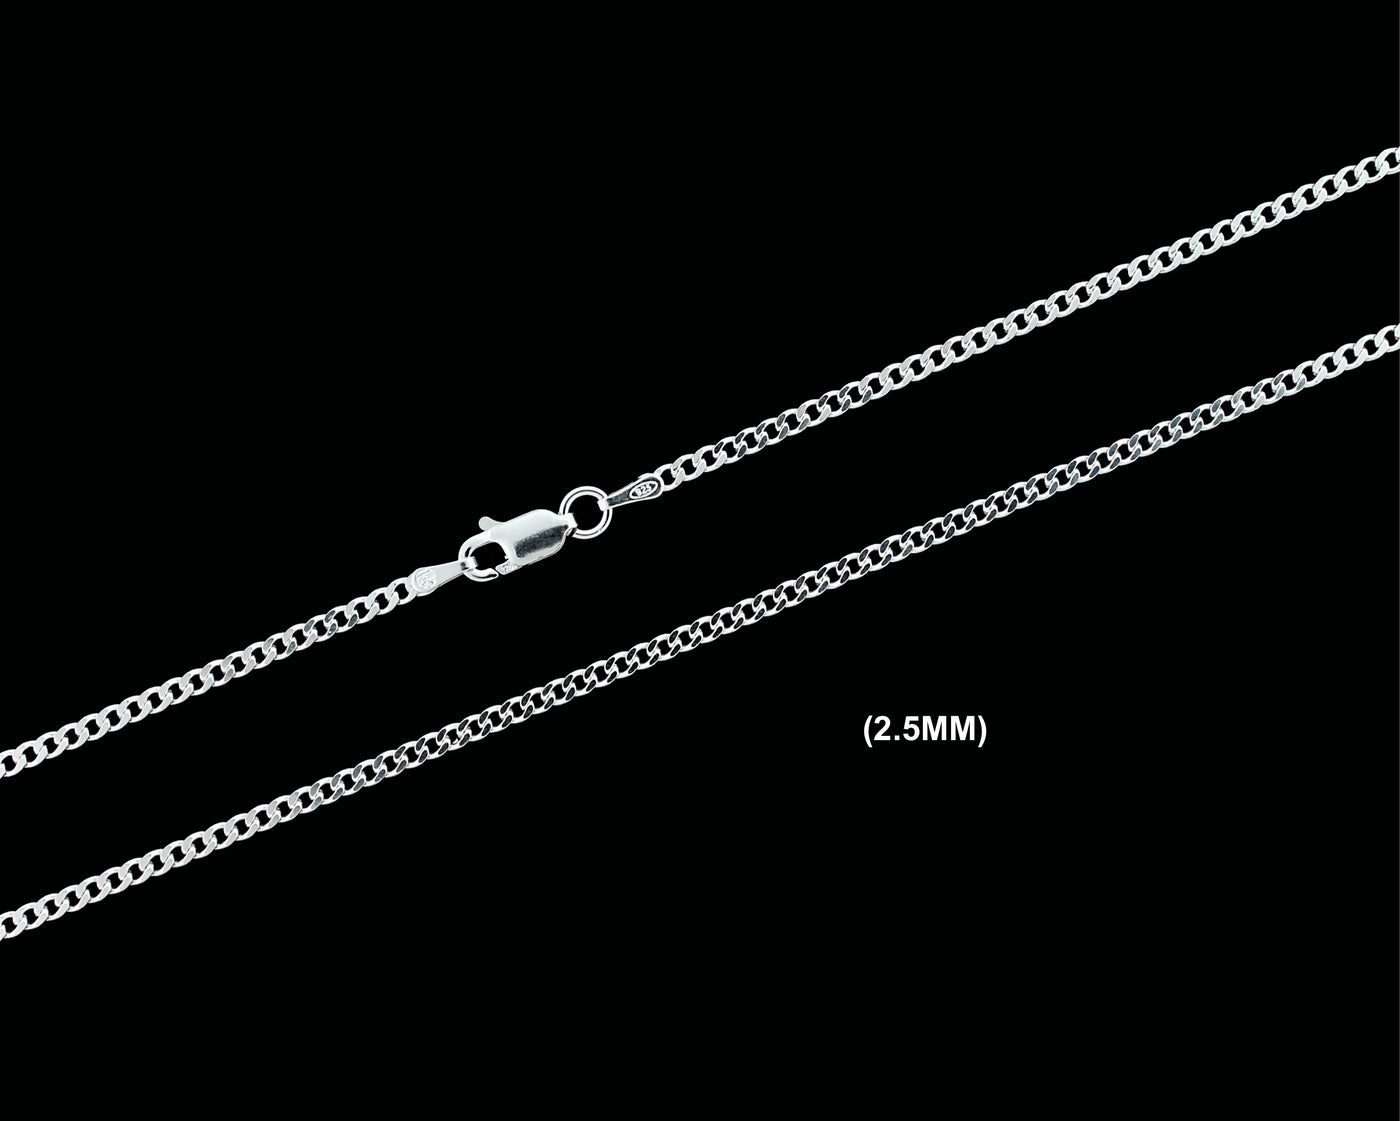 2.5MM SOLID 925 Sterling Silver Cuban Curb Link Chain Necklace or Bracelet ITALY